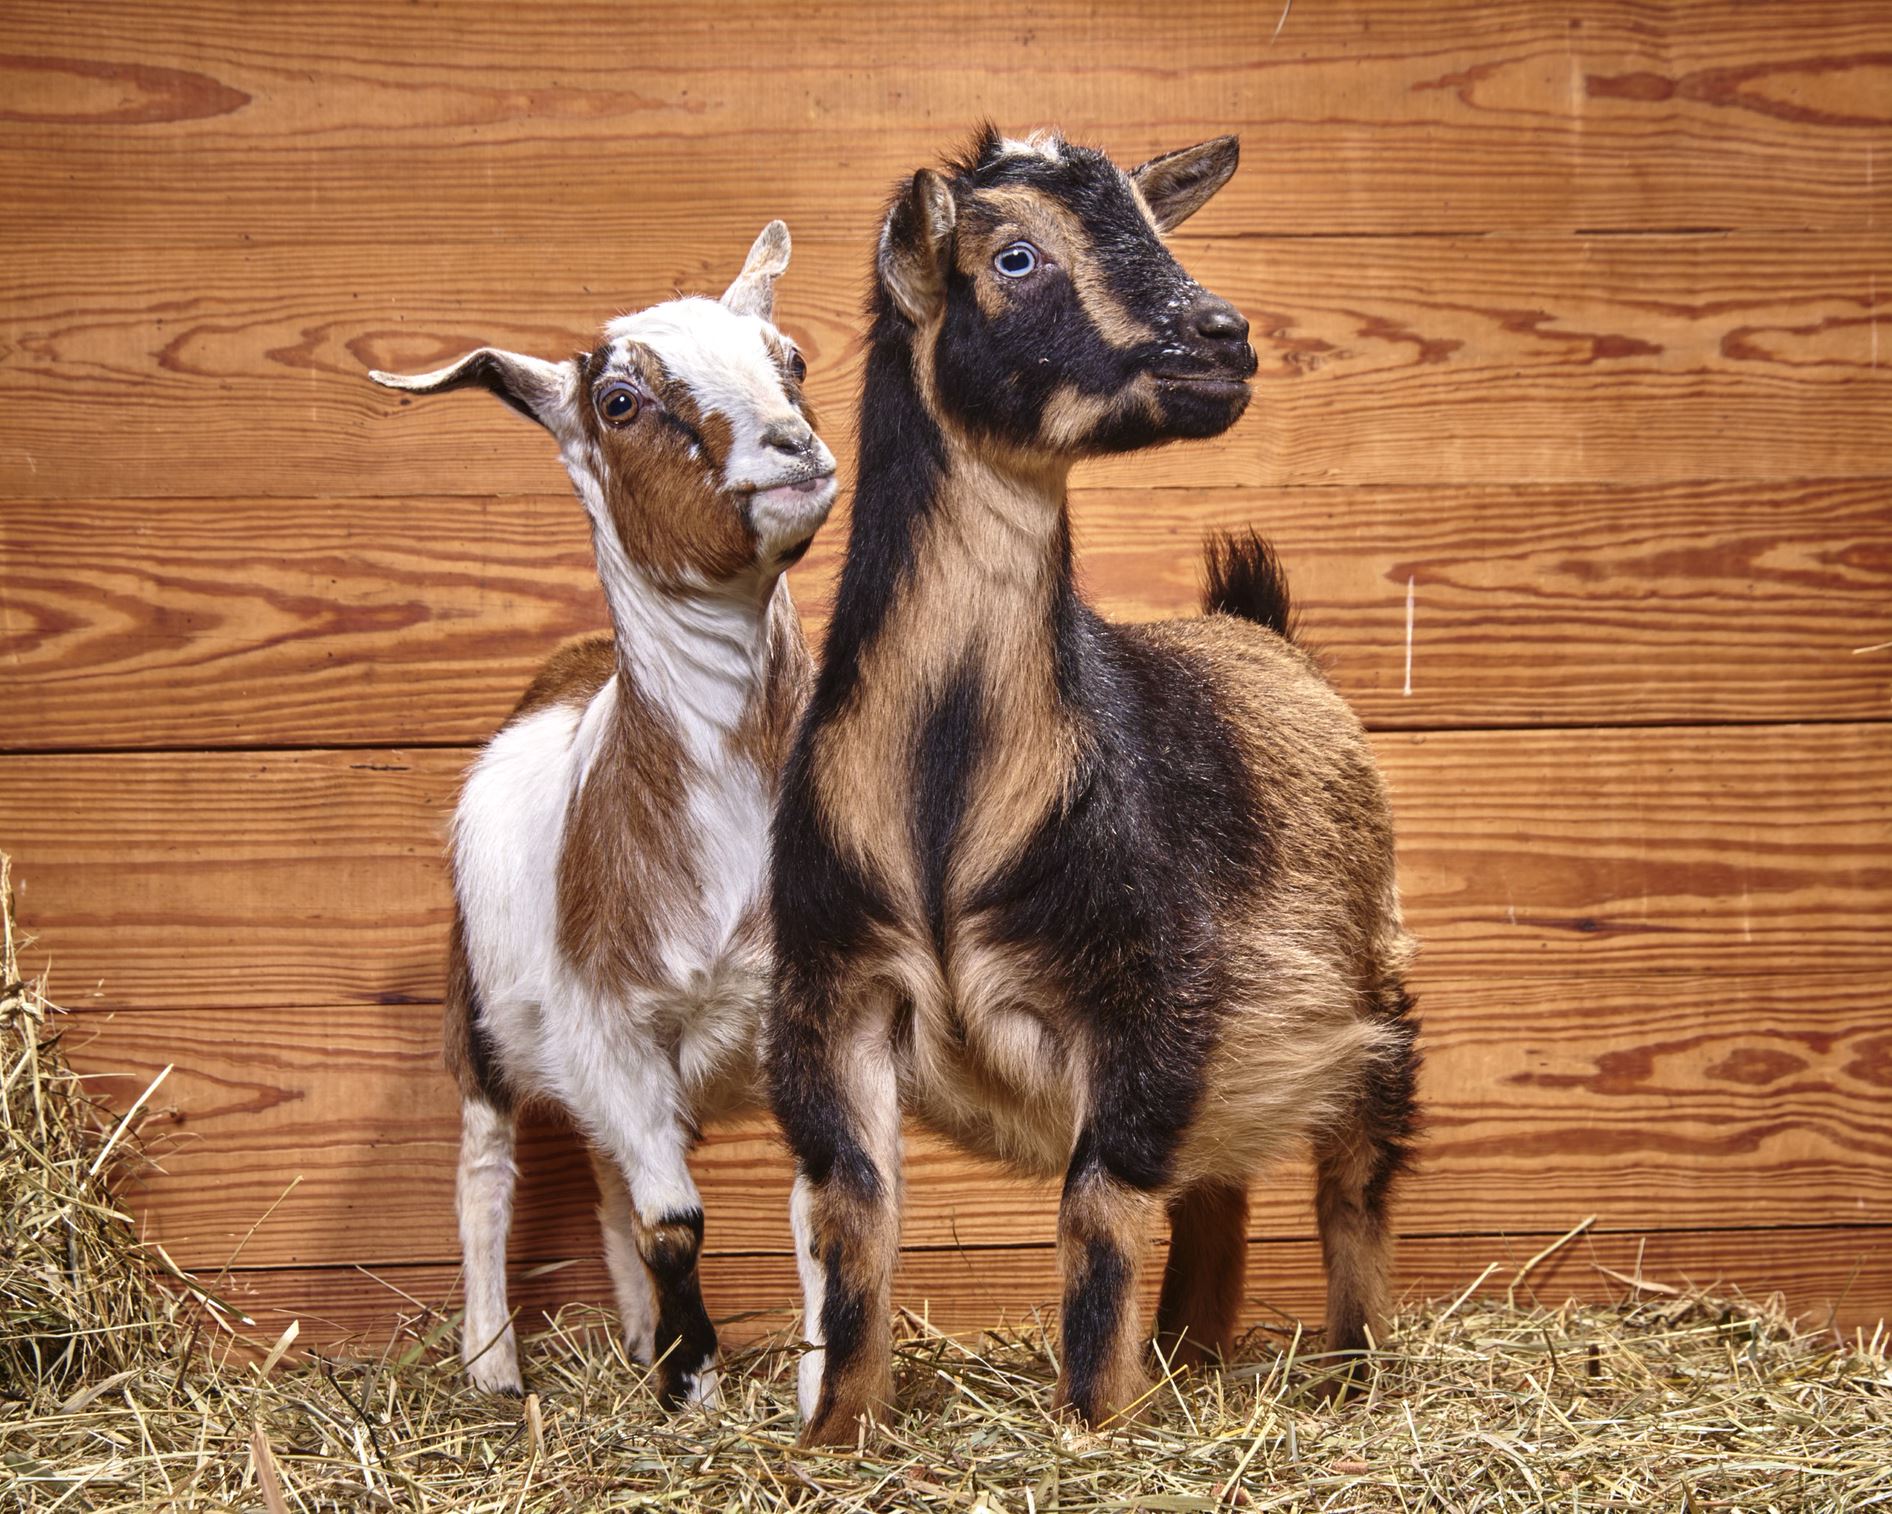 Barn Buddy Laverne and Shirley, the Dwarf Goats